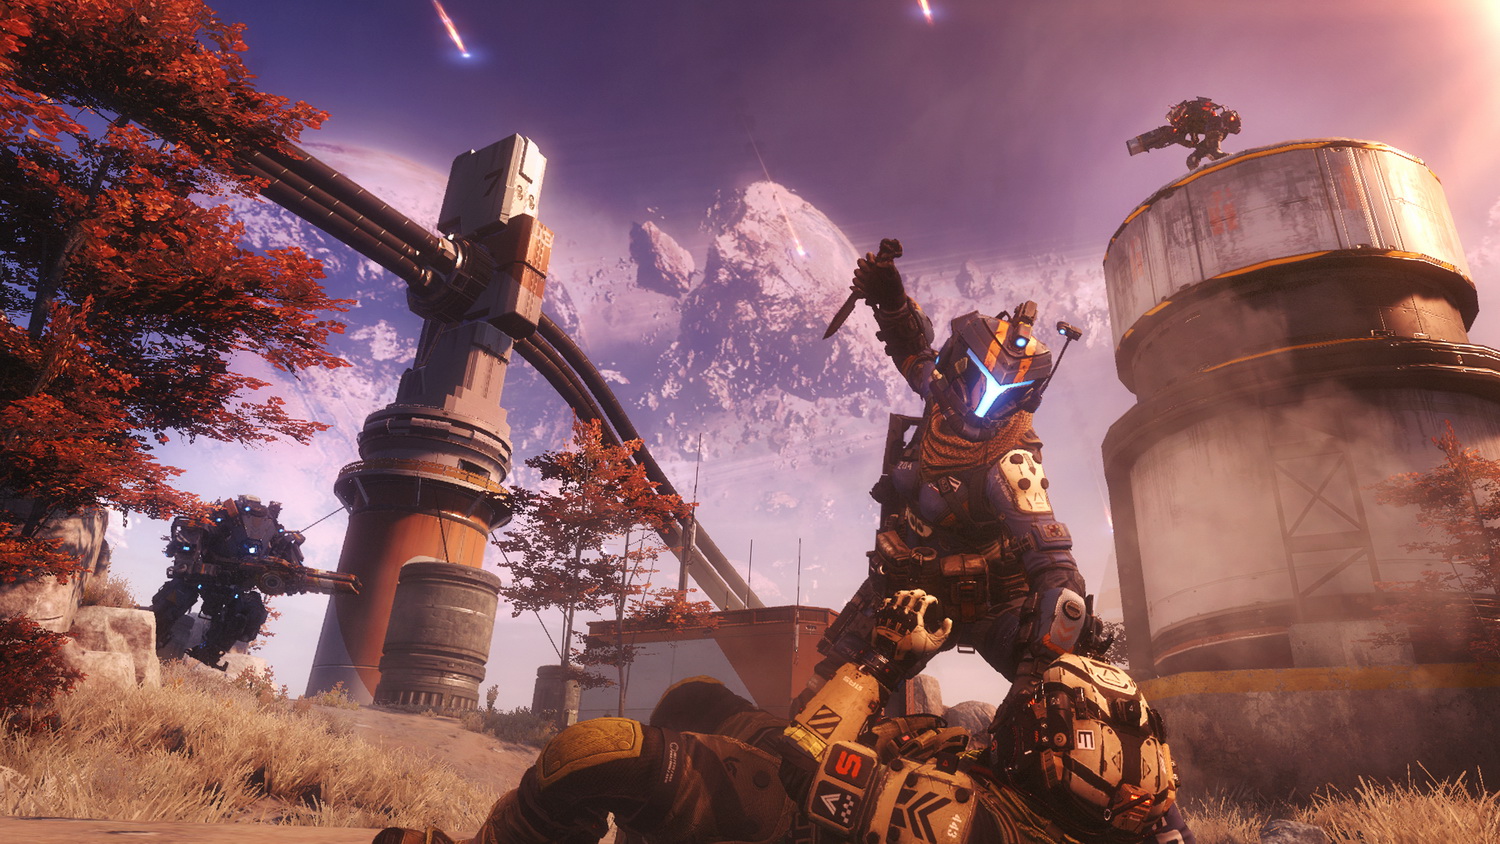 Titanfall 2 works surprisingly well as a single-player game